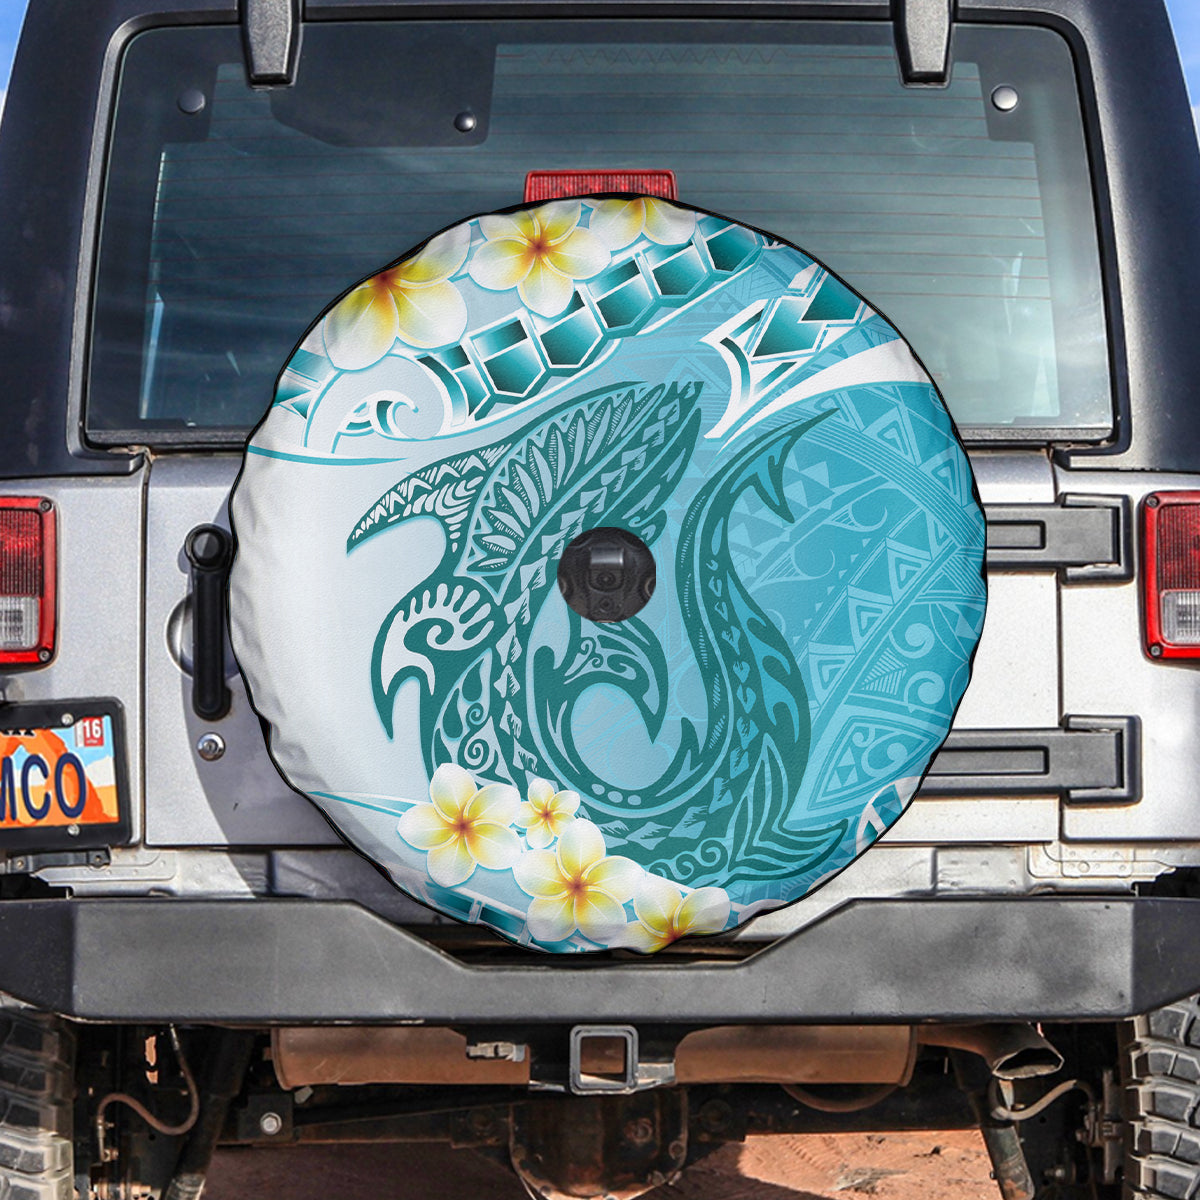 Turquoise Hawaii Shark Tattoo Spare Tire Cover Frangipani With Polynesian Pastel Version